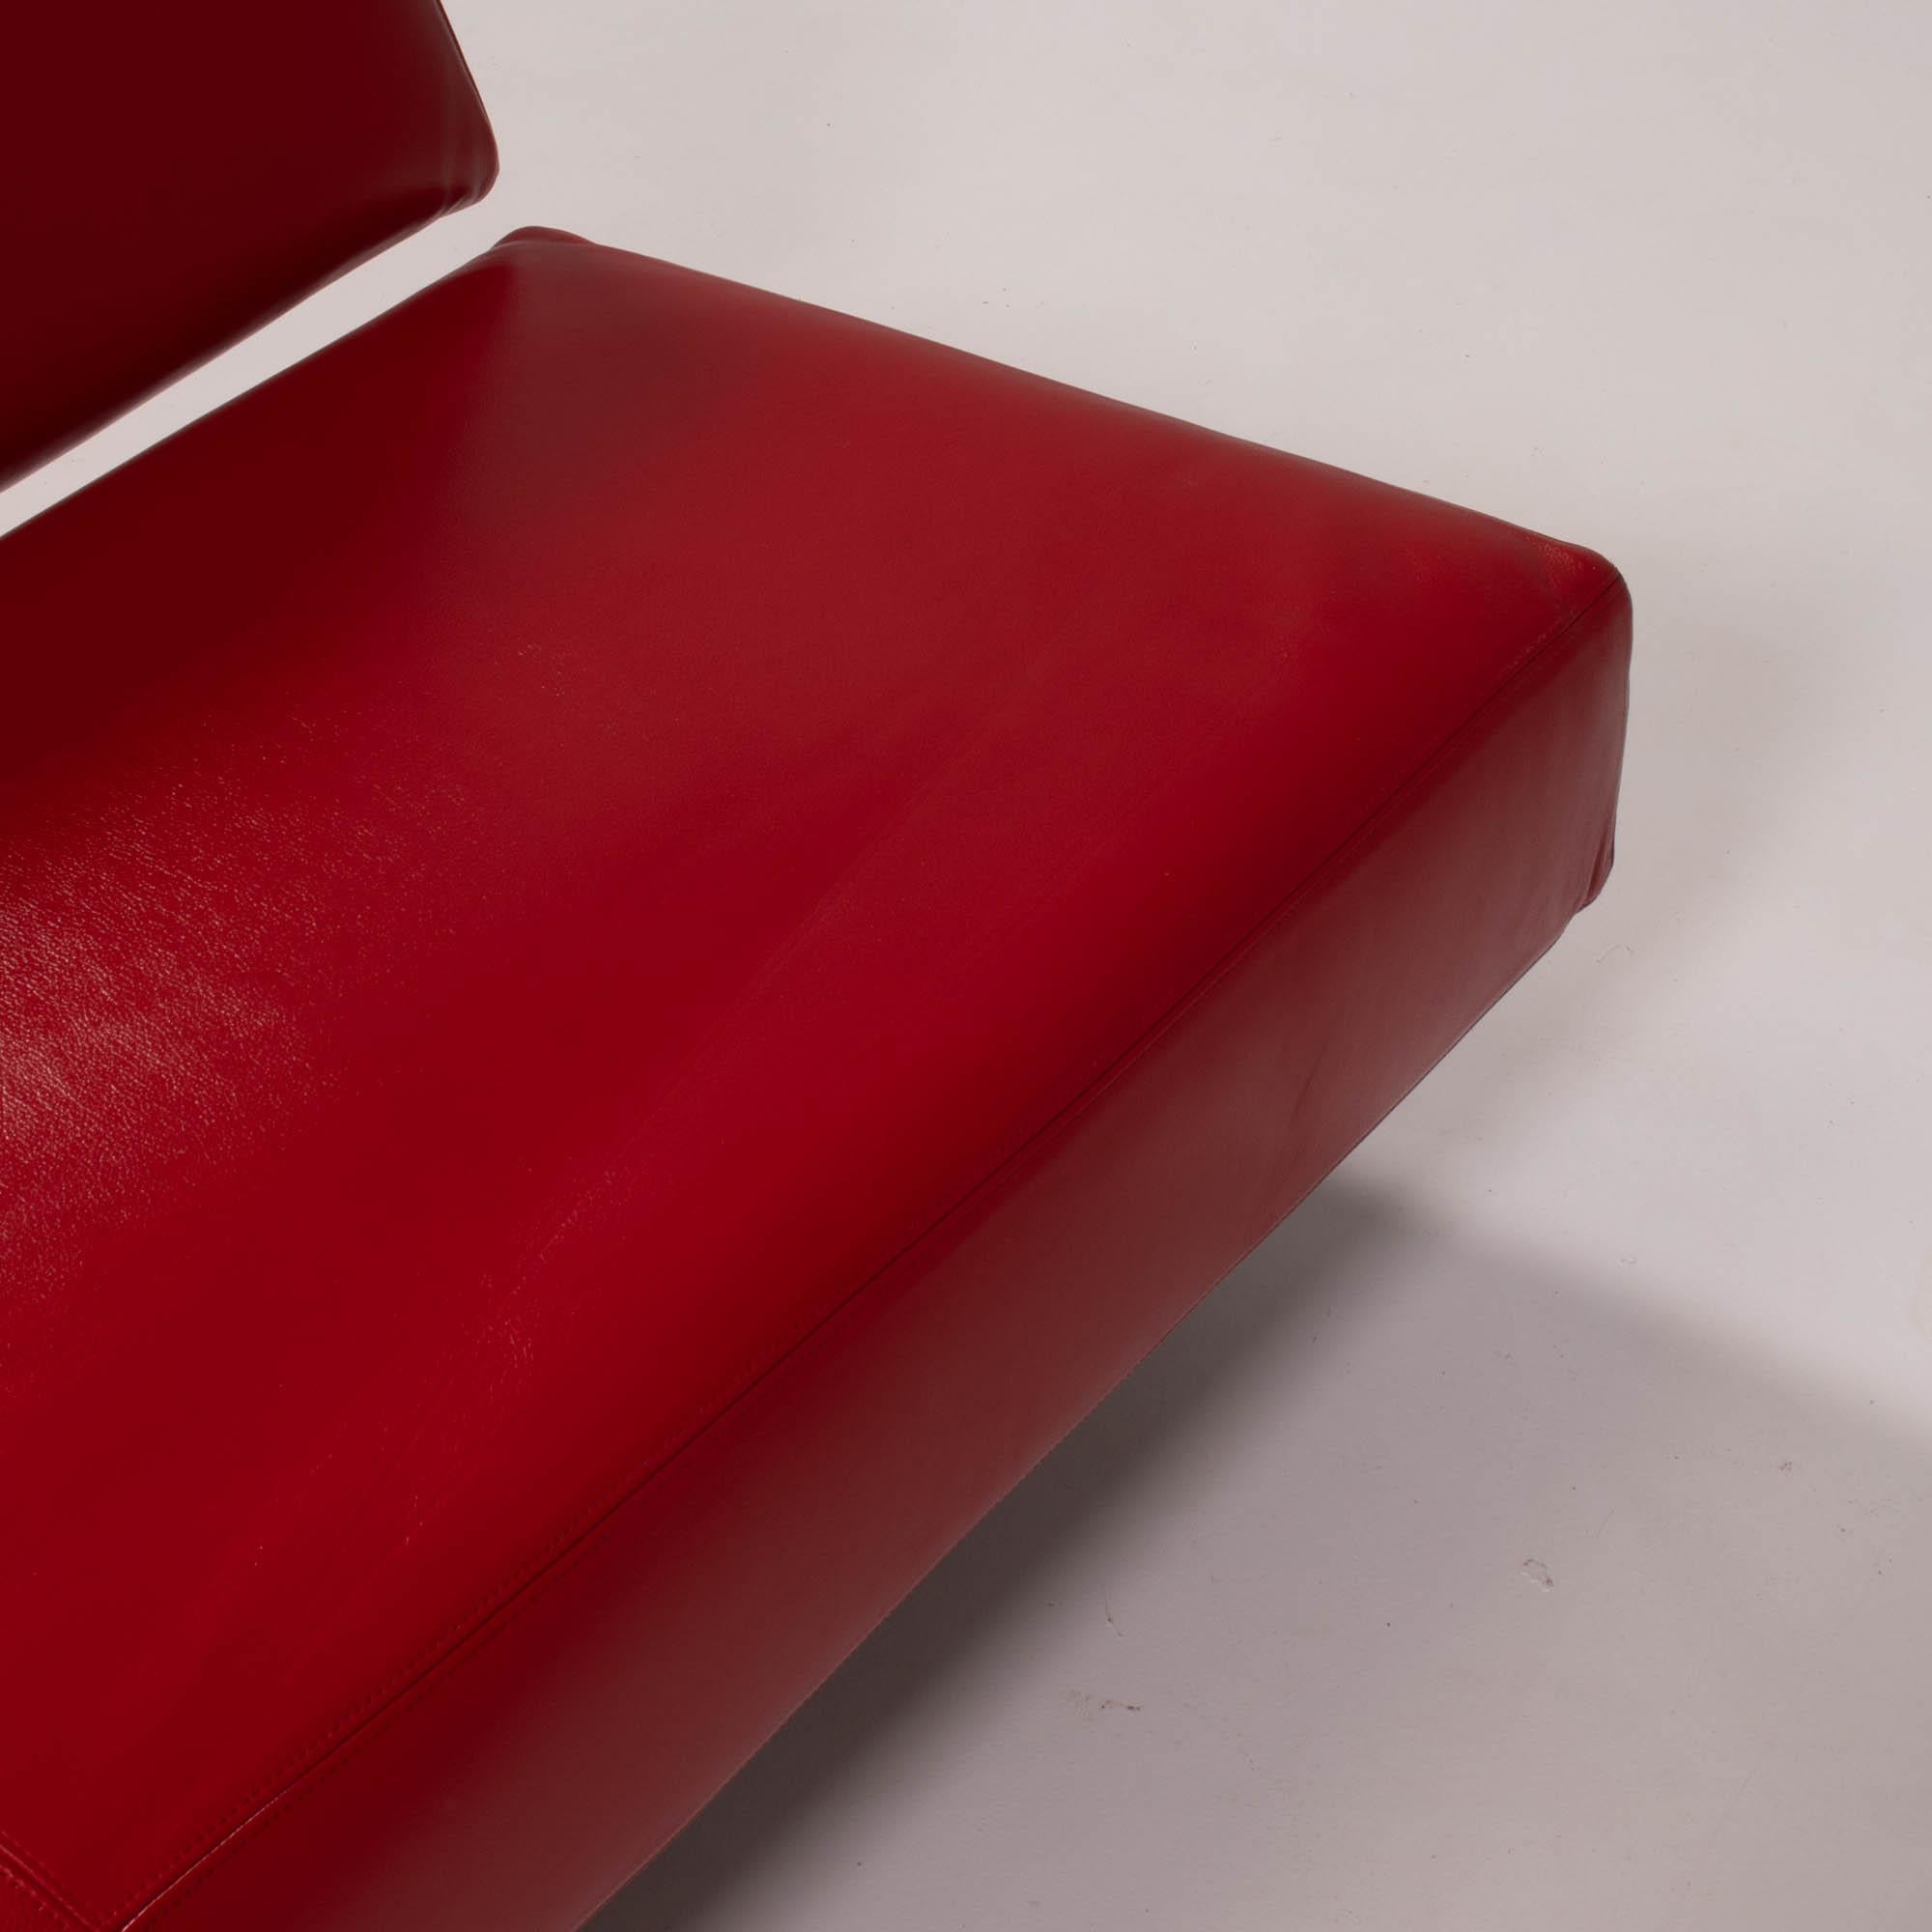 Cassina Asped Red Leather Sofa Byjean-Marie Massaud, 2005 3